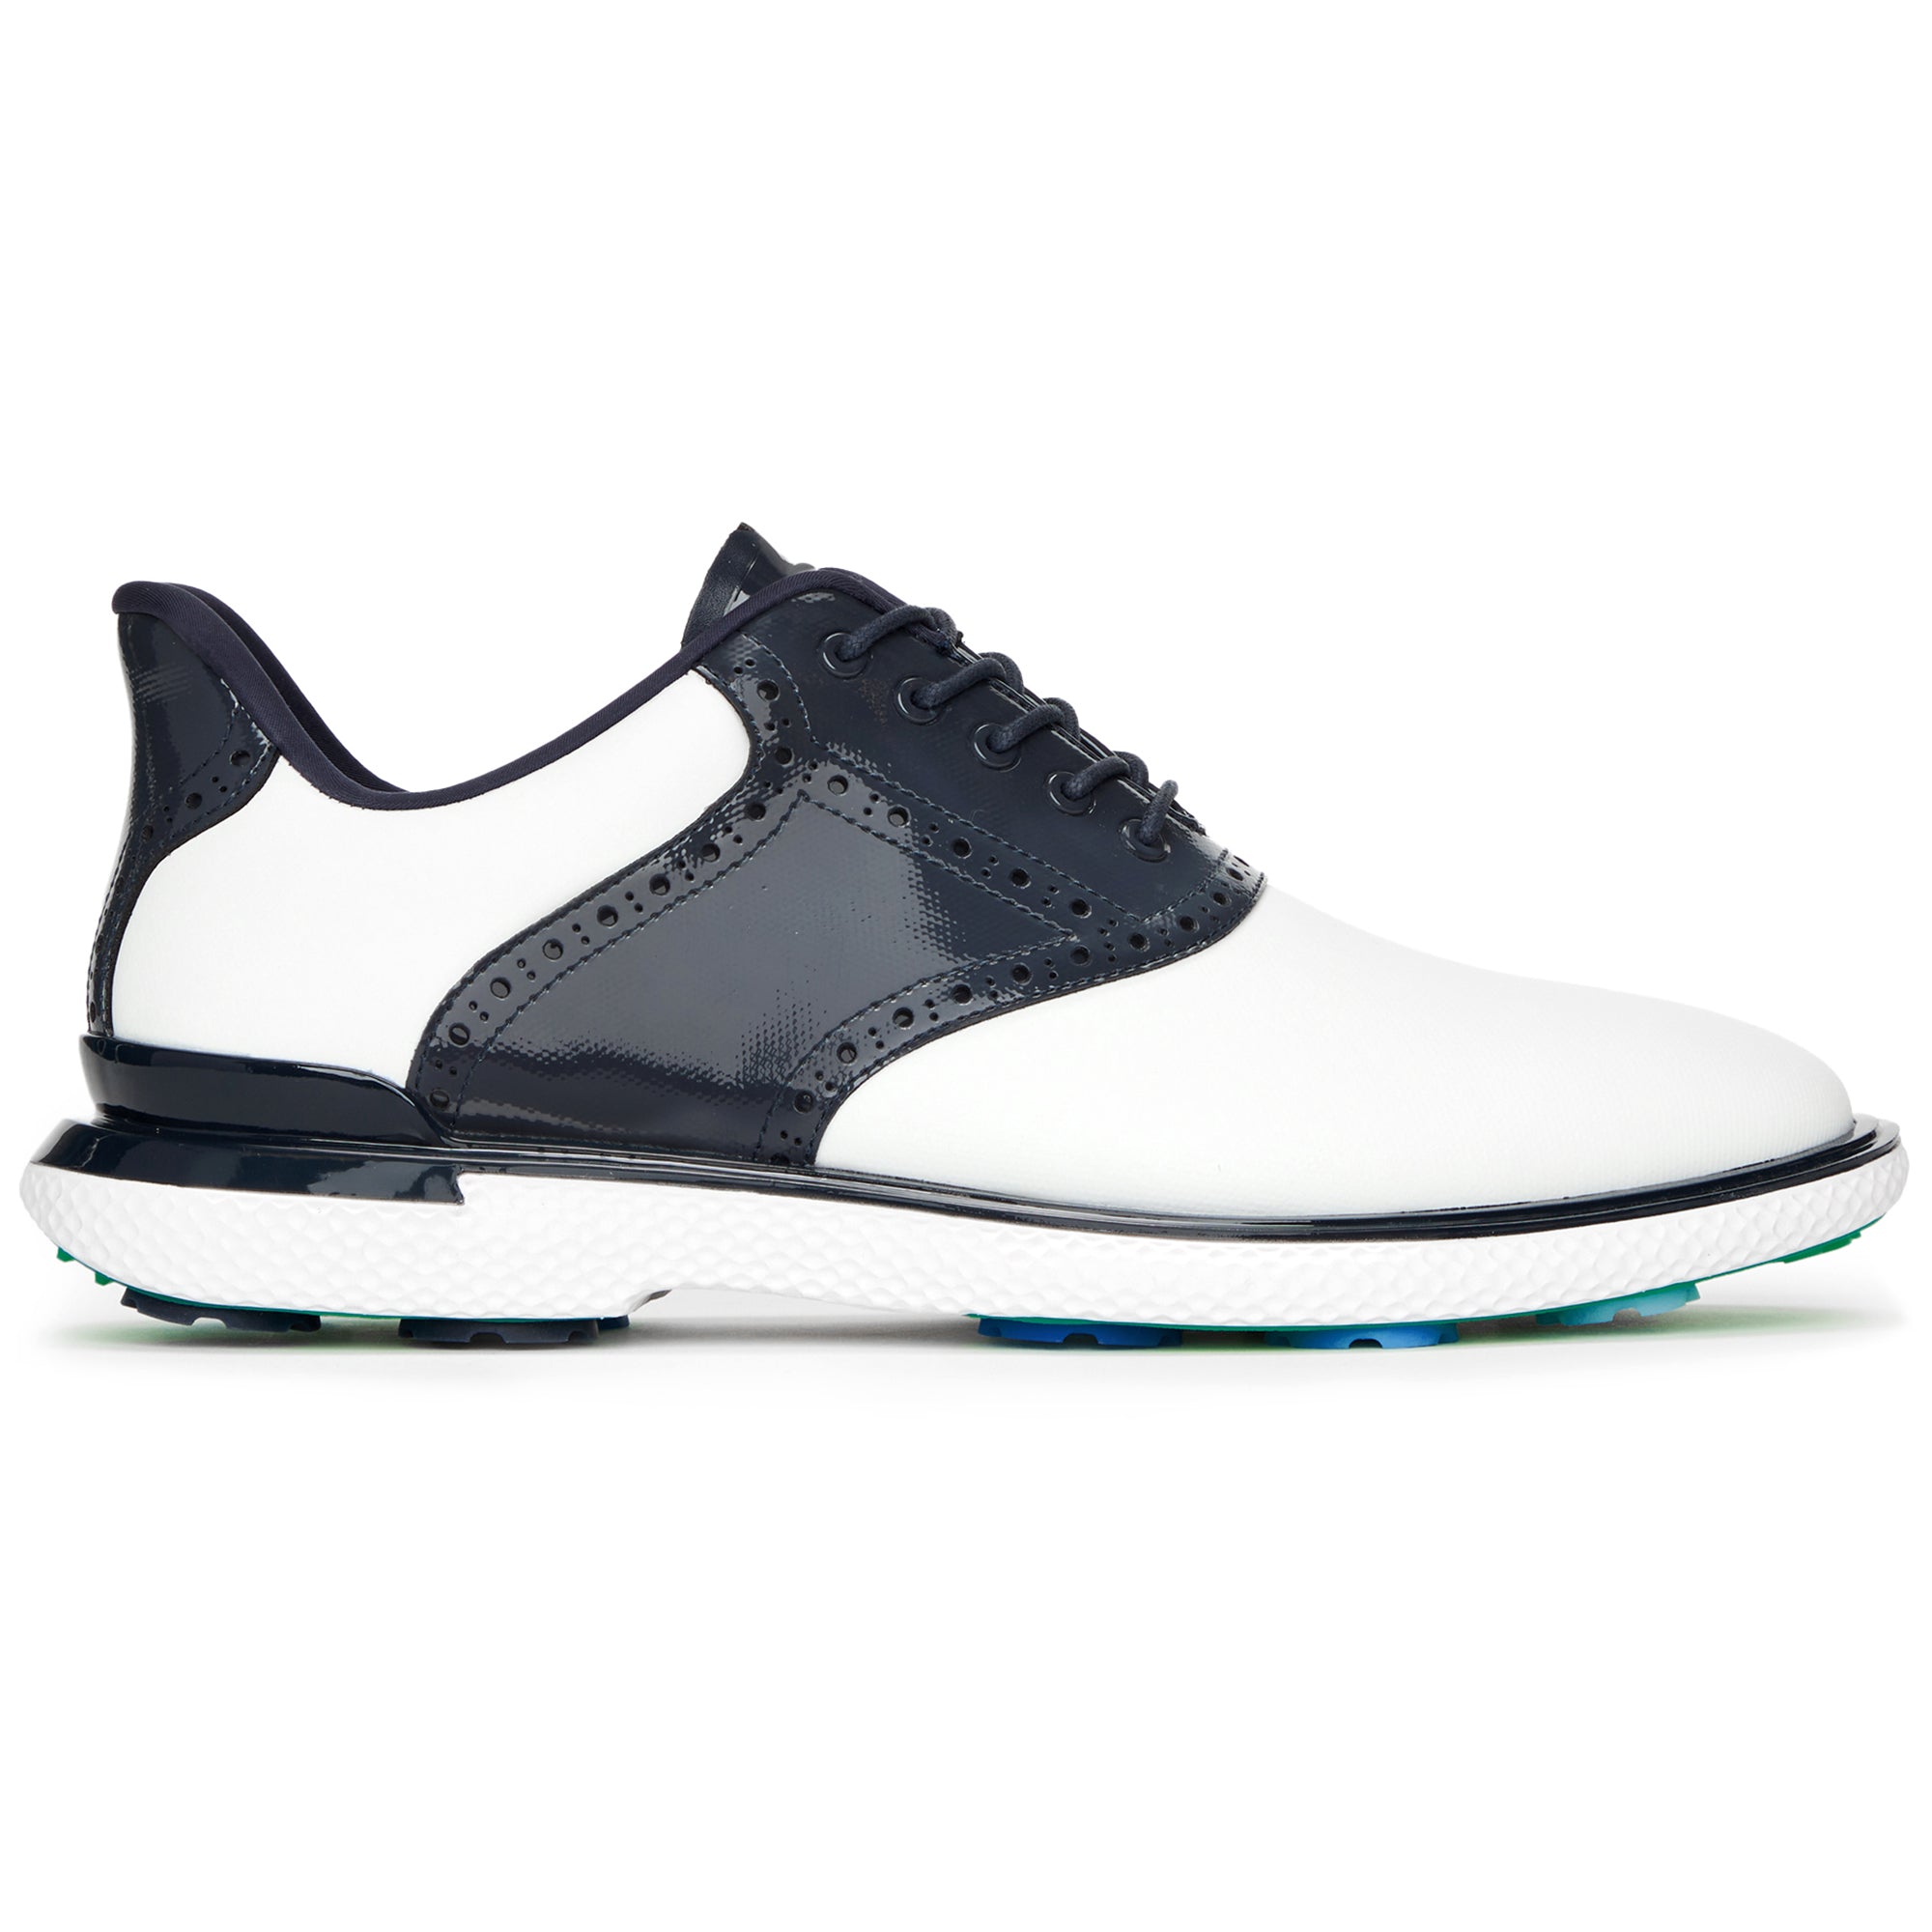 G/FORE Gallivan2r Saddle Golf Shoes